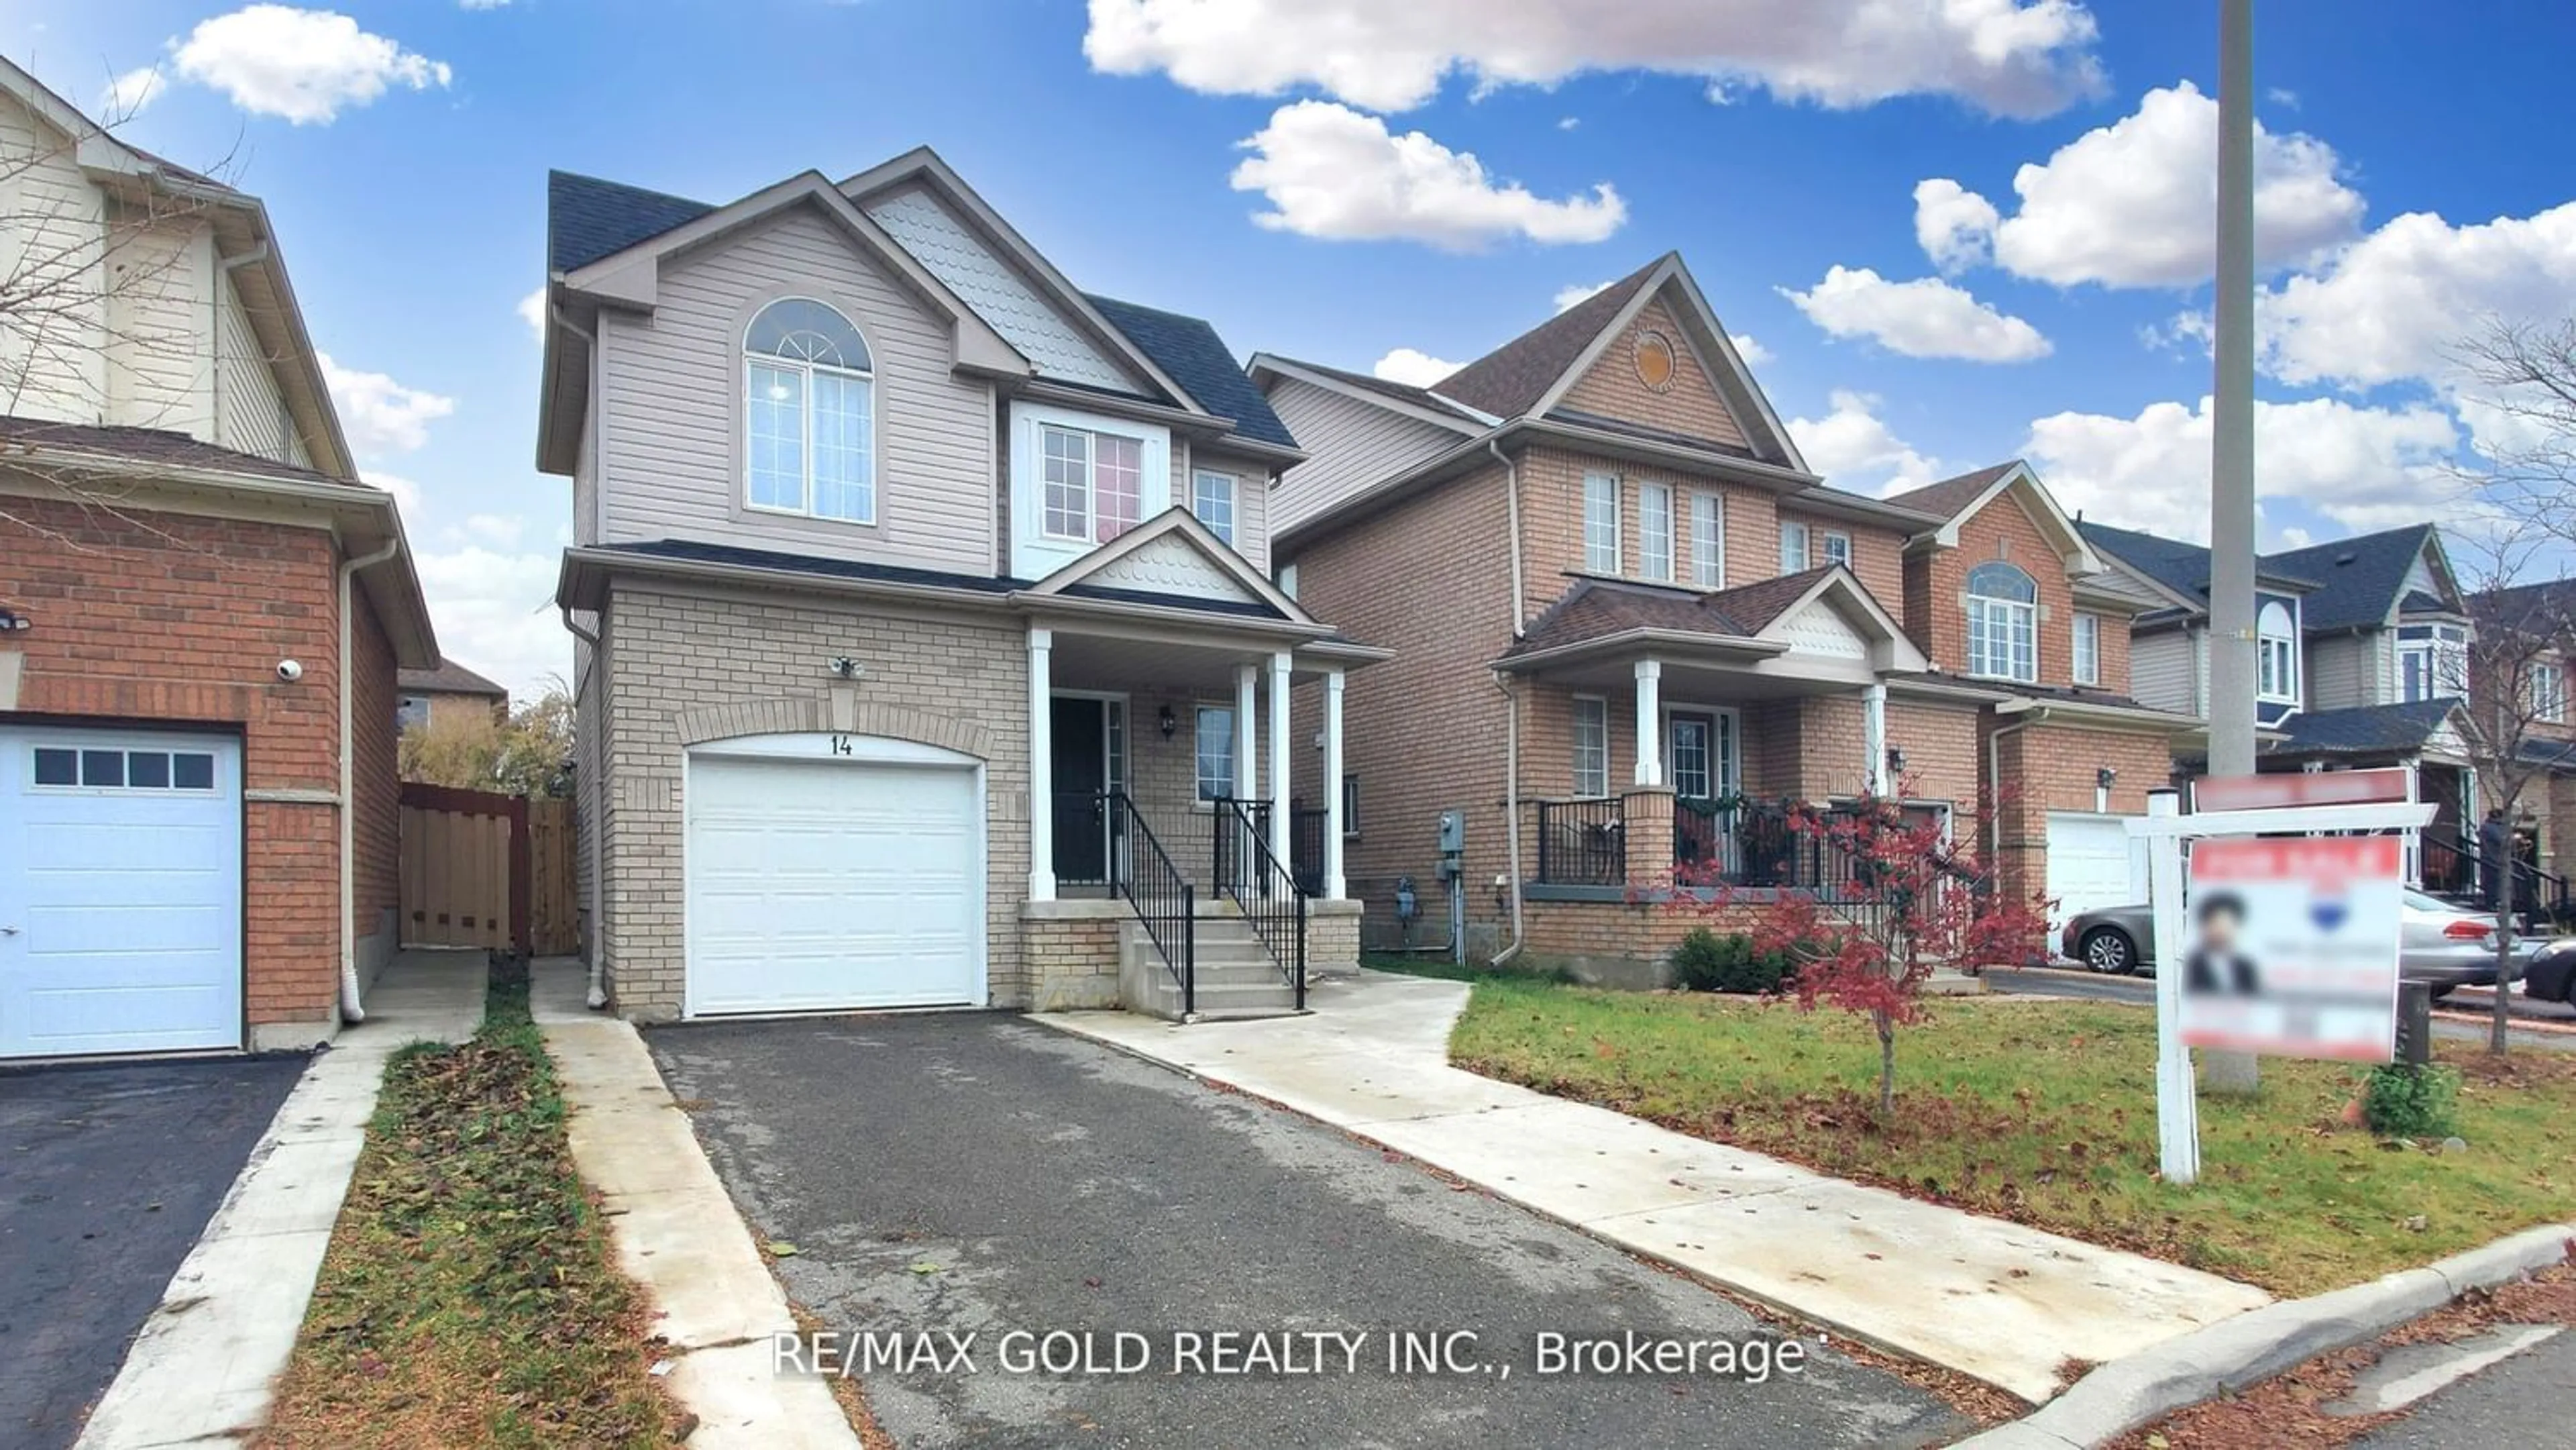 Frontside or backside of a home for 14 Allangrove Dr, Brampton Ontario L7A 2M4